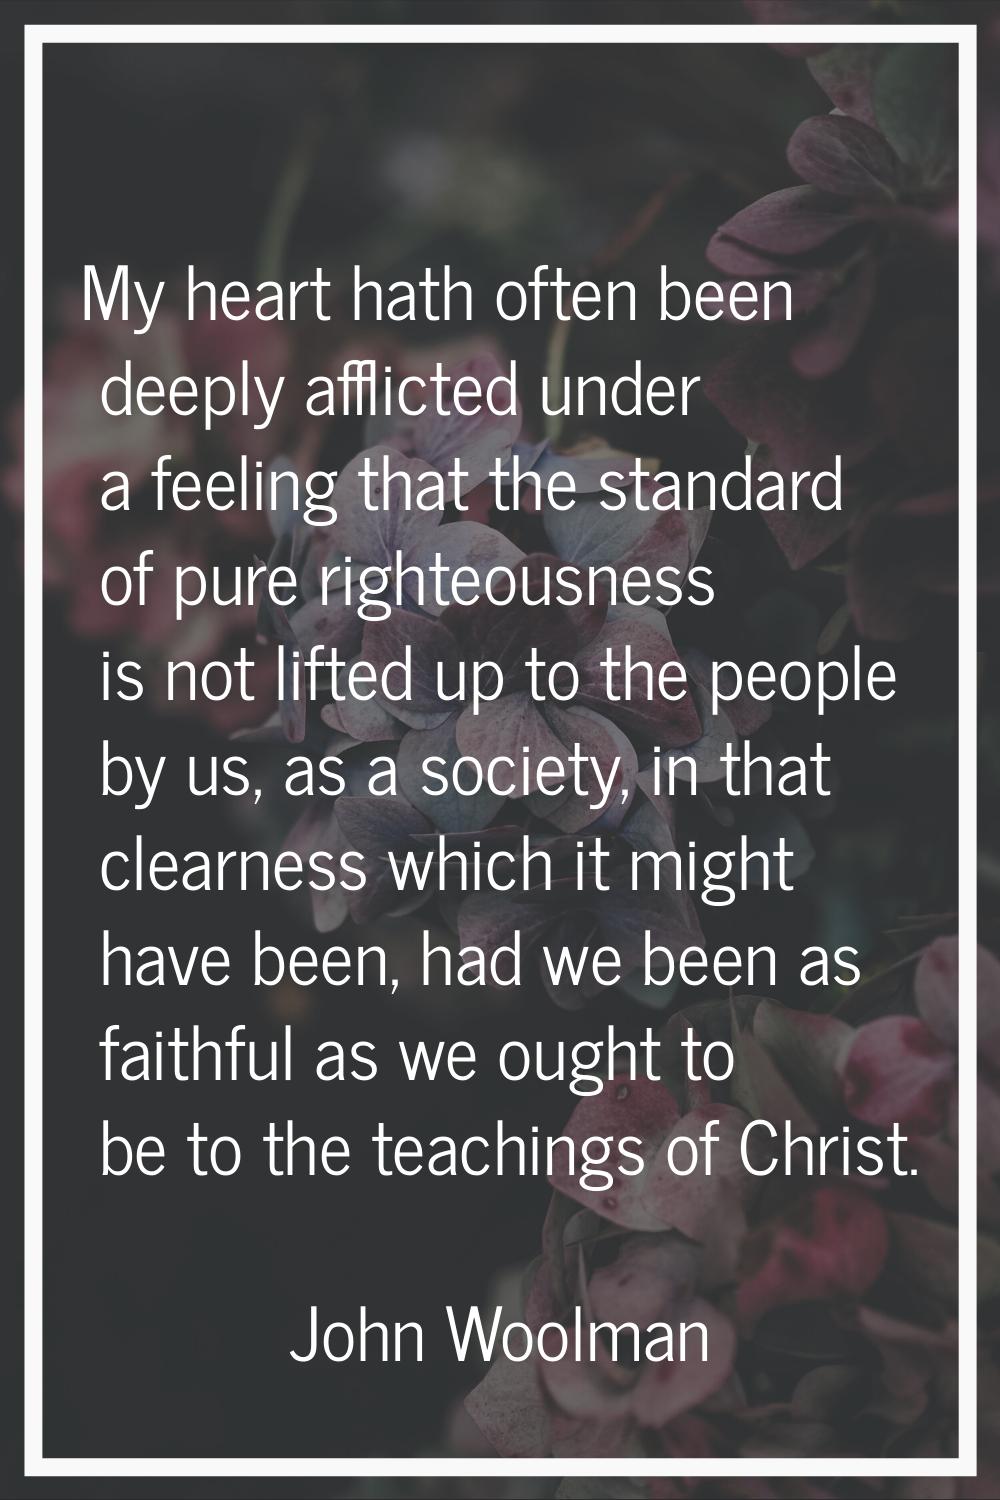 My heart hath often been deeply afflicted under a feeling that the standard of pure righteousness i